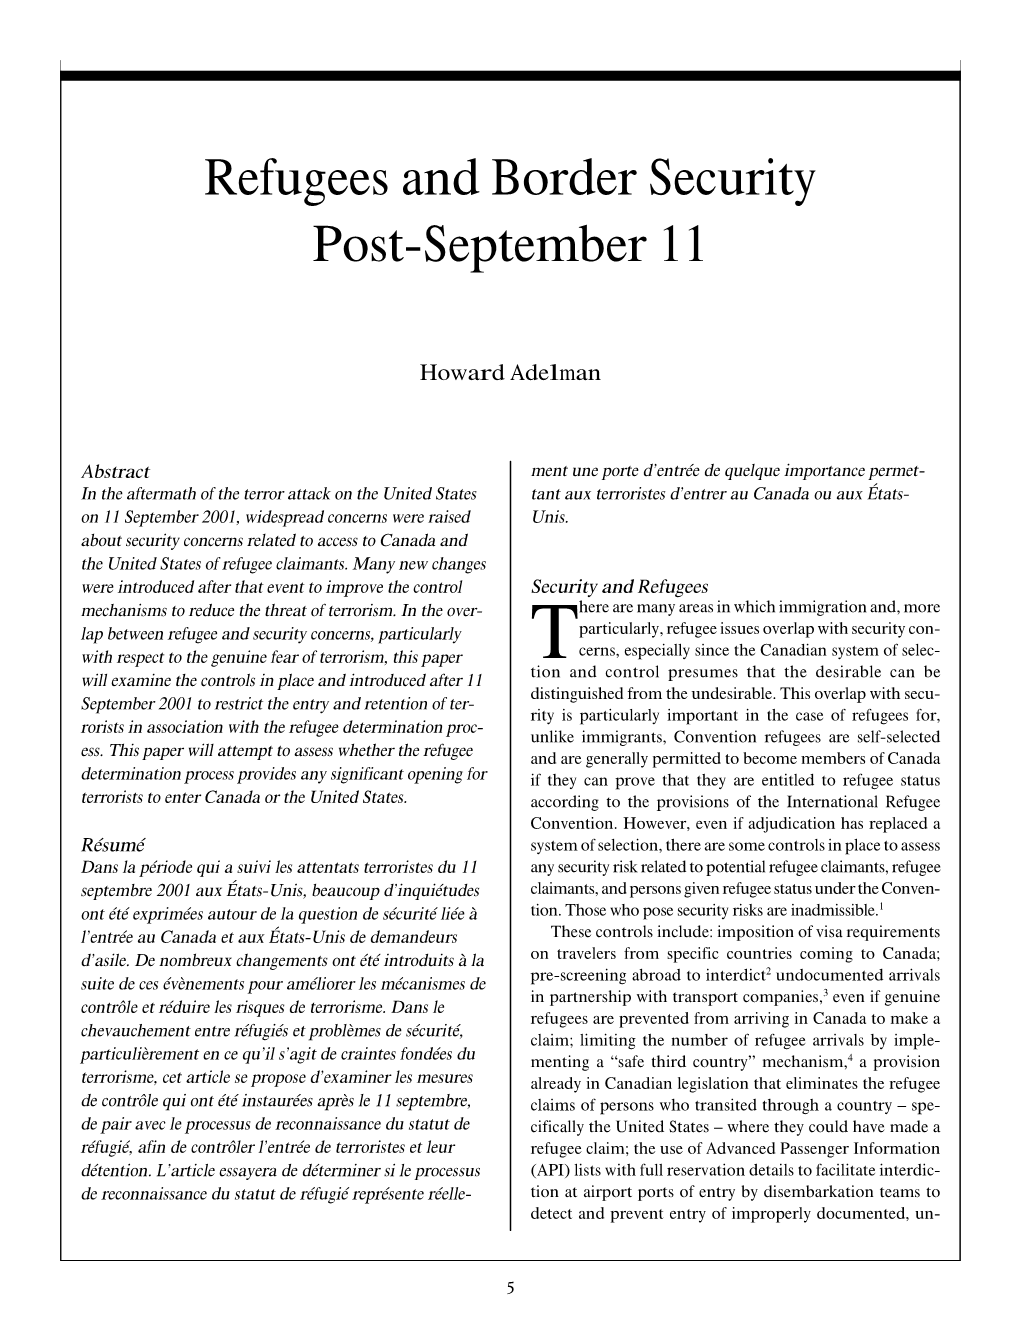 Refugees.And.Border.Security.Pdf (1.010Mb)